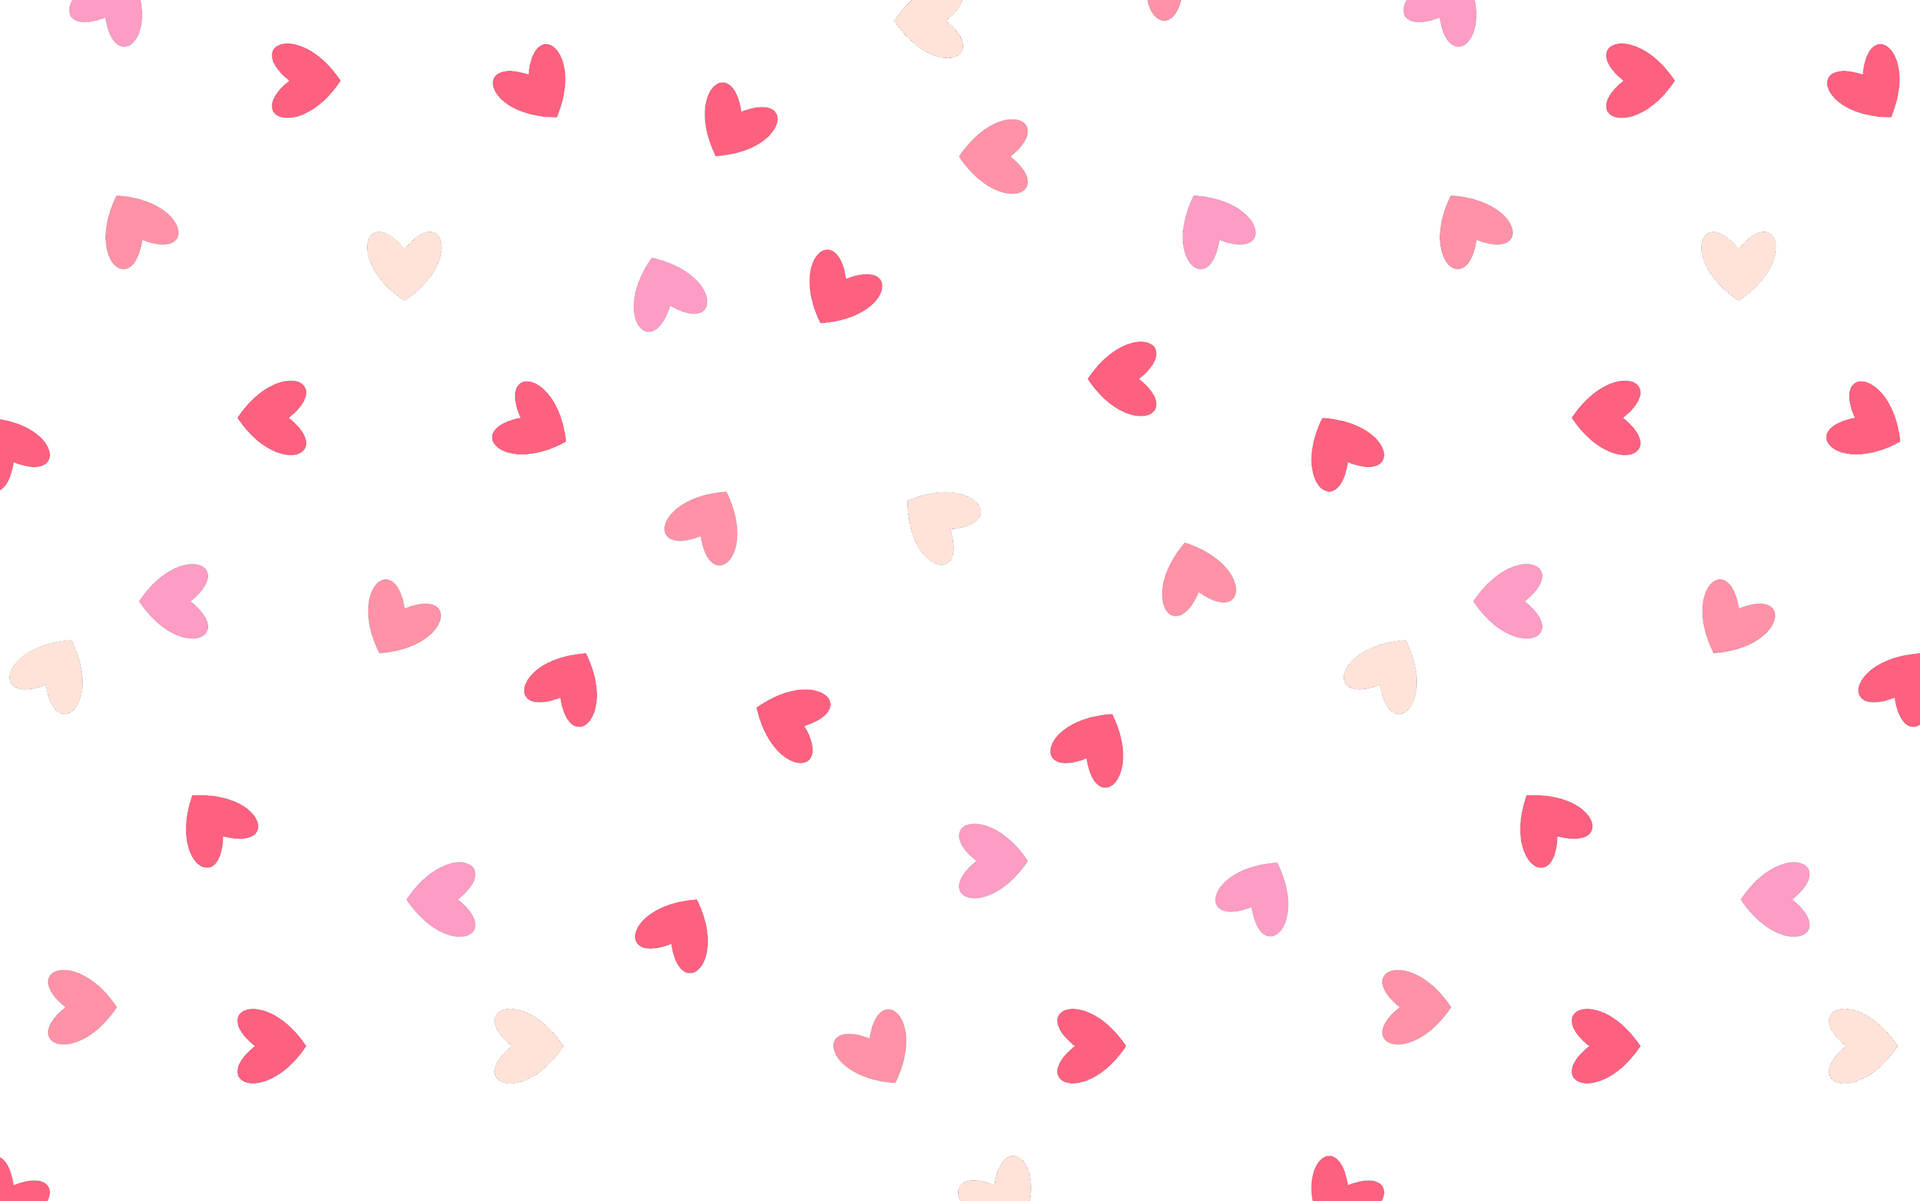 Happy Valentine's Day from Tumblr! Wallpaper